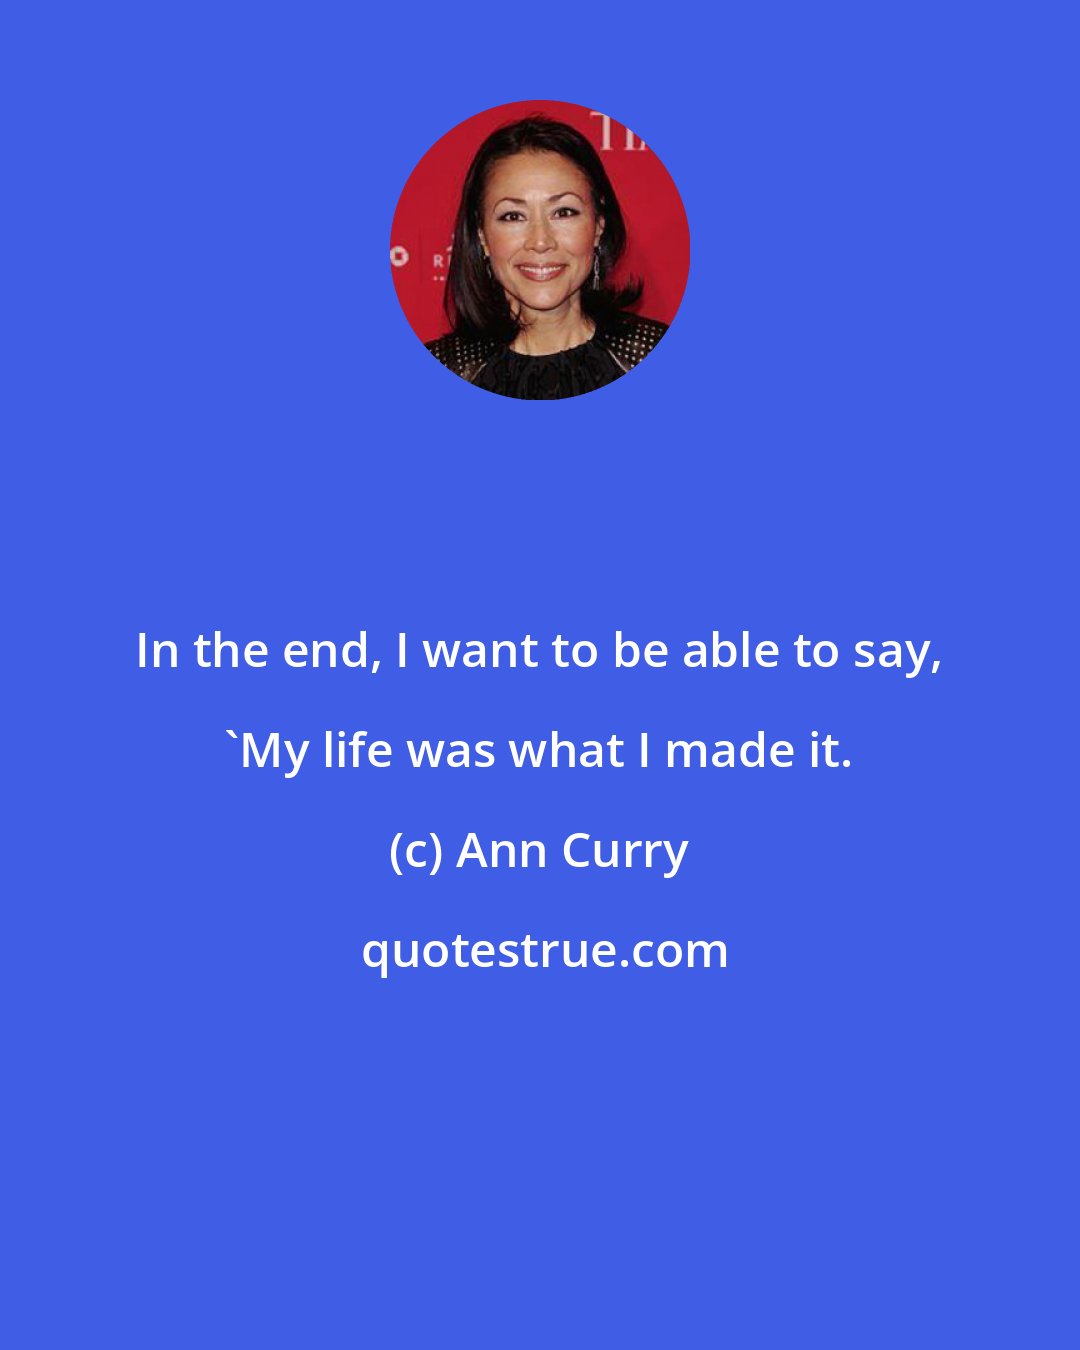 Ann Curry: In the end, I want to be able to say, 'My life was what I made it.